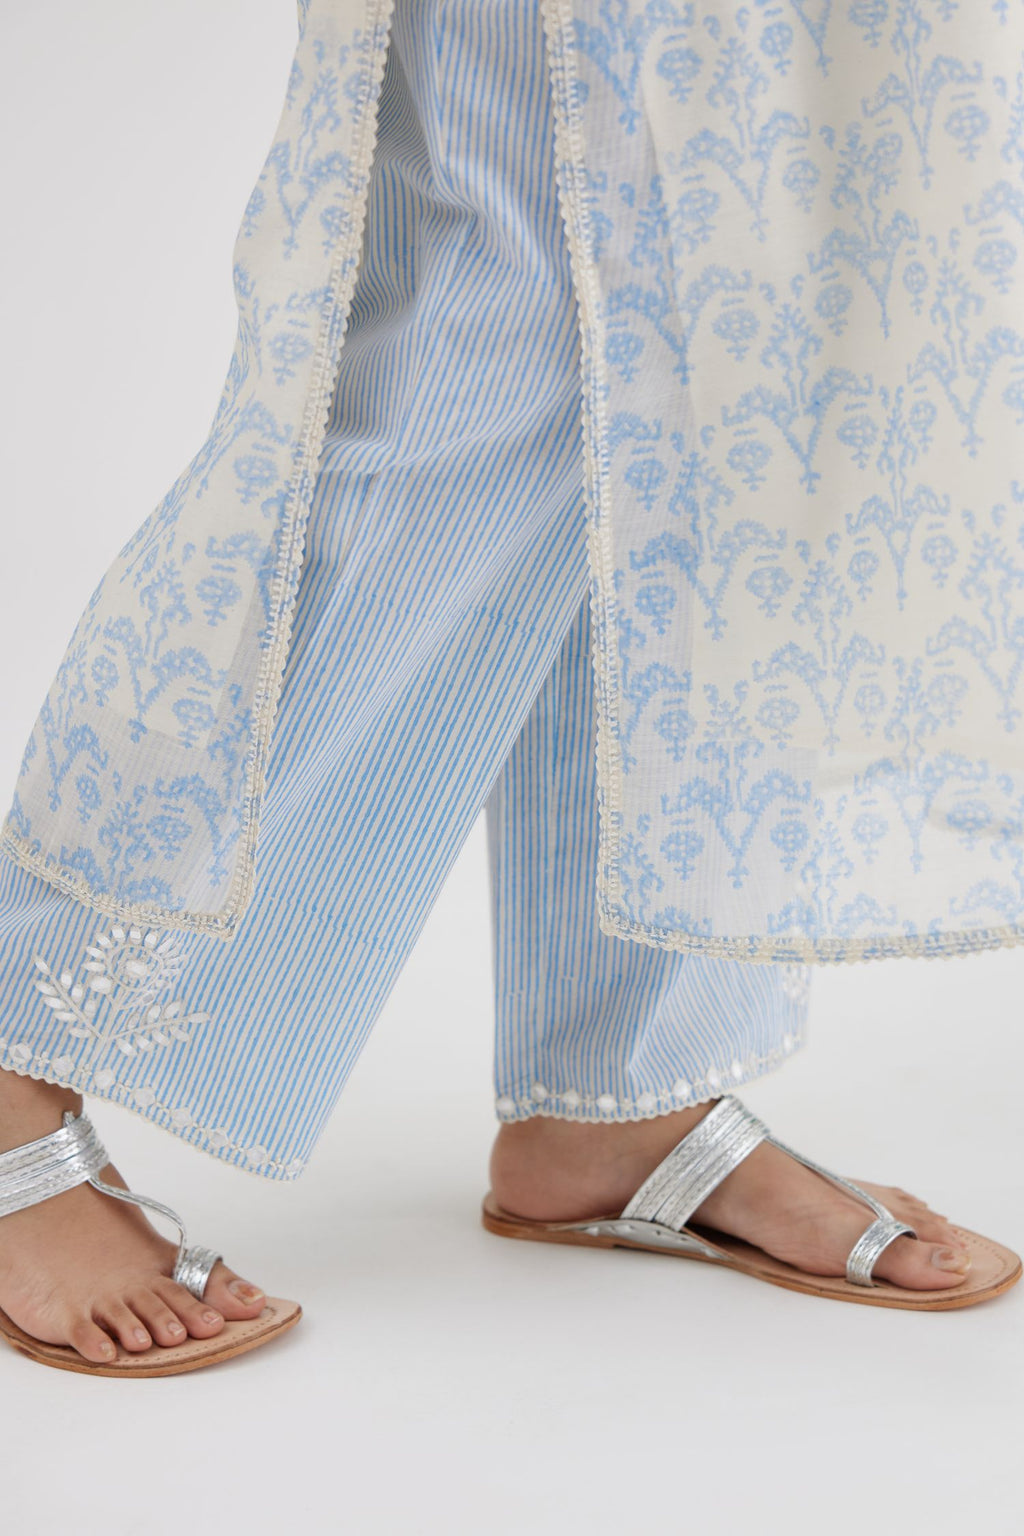 Ikat design blue and off white hand block-printed Cotton Chanderi straight long kurta set with off-white thread embroidery.